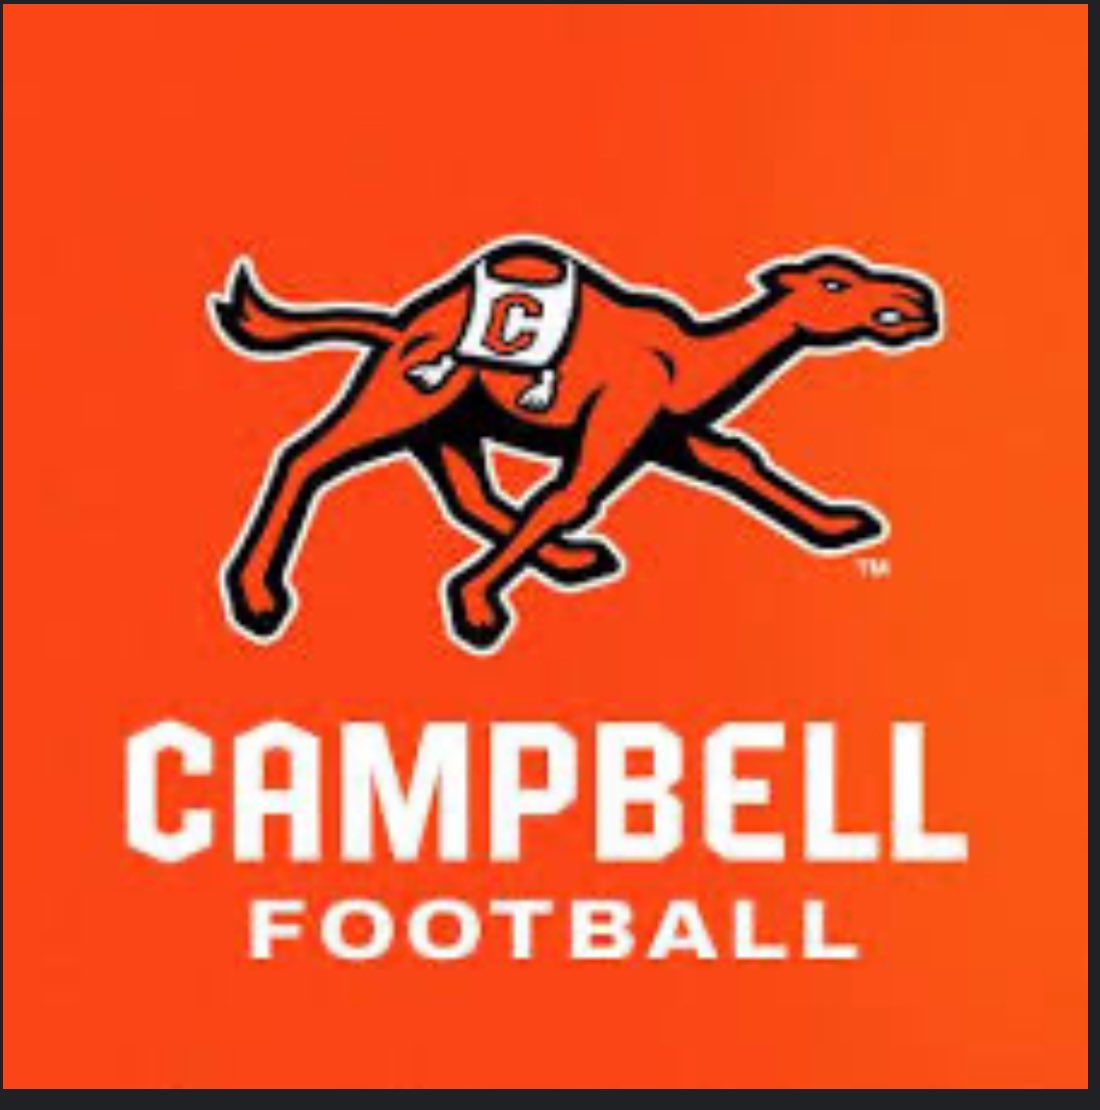 #AGTG received my first division 1 offer from @GoCamelsFB thank you @MattKubik for offering me!! 
@Coach_Dise @Hillcrest_FB @Rivals @dctf @TXTopTalent @247Sports